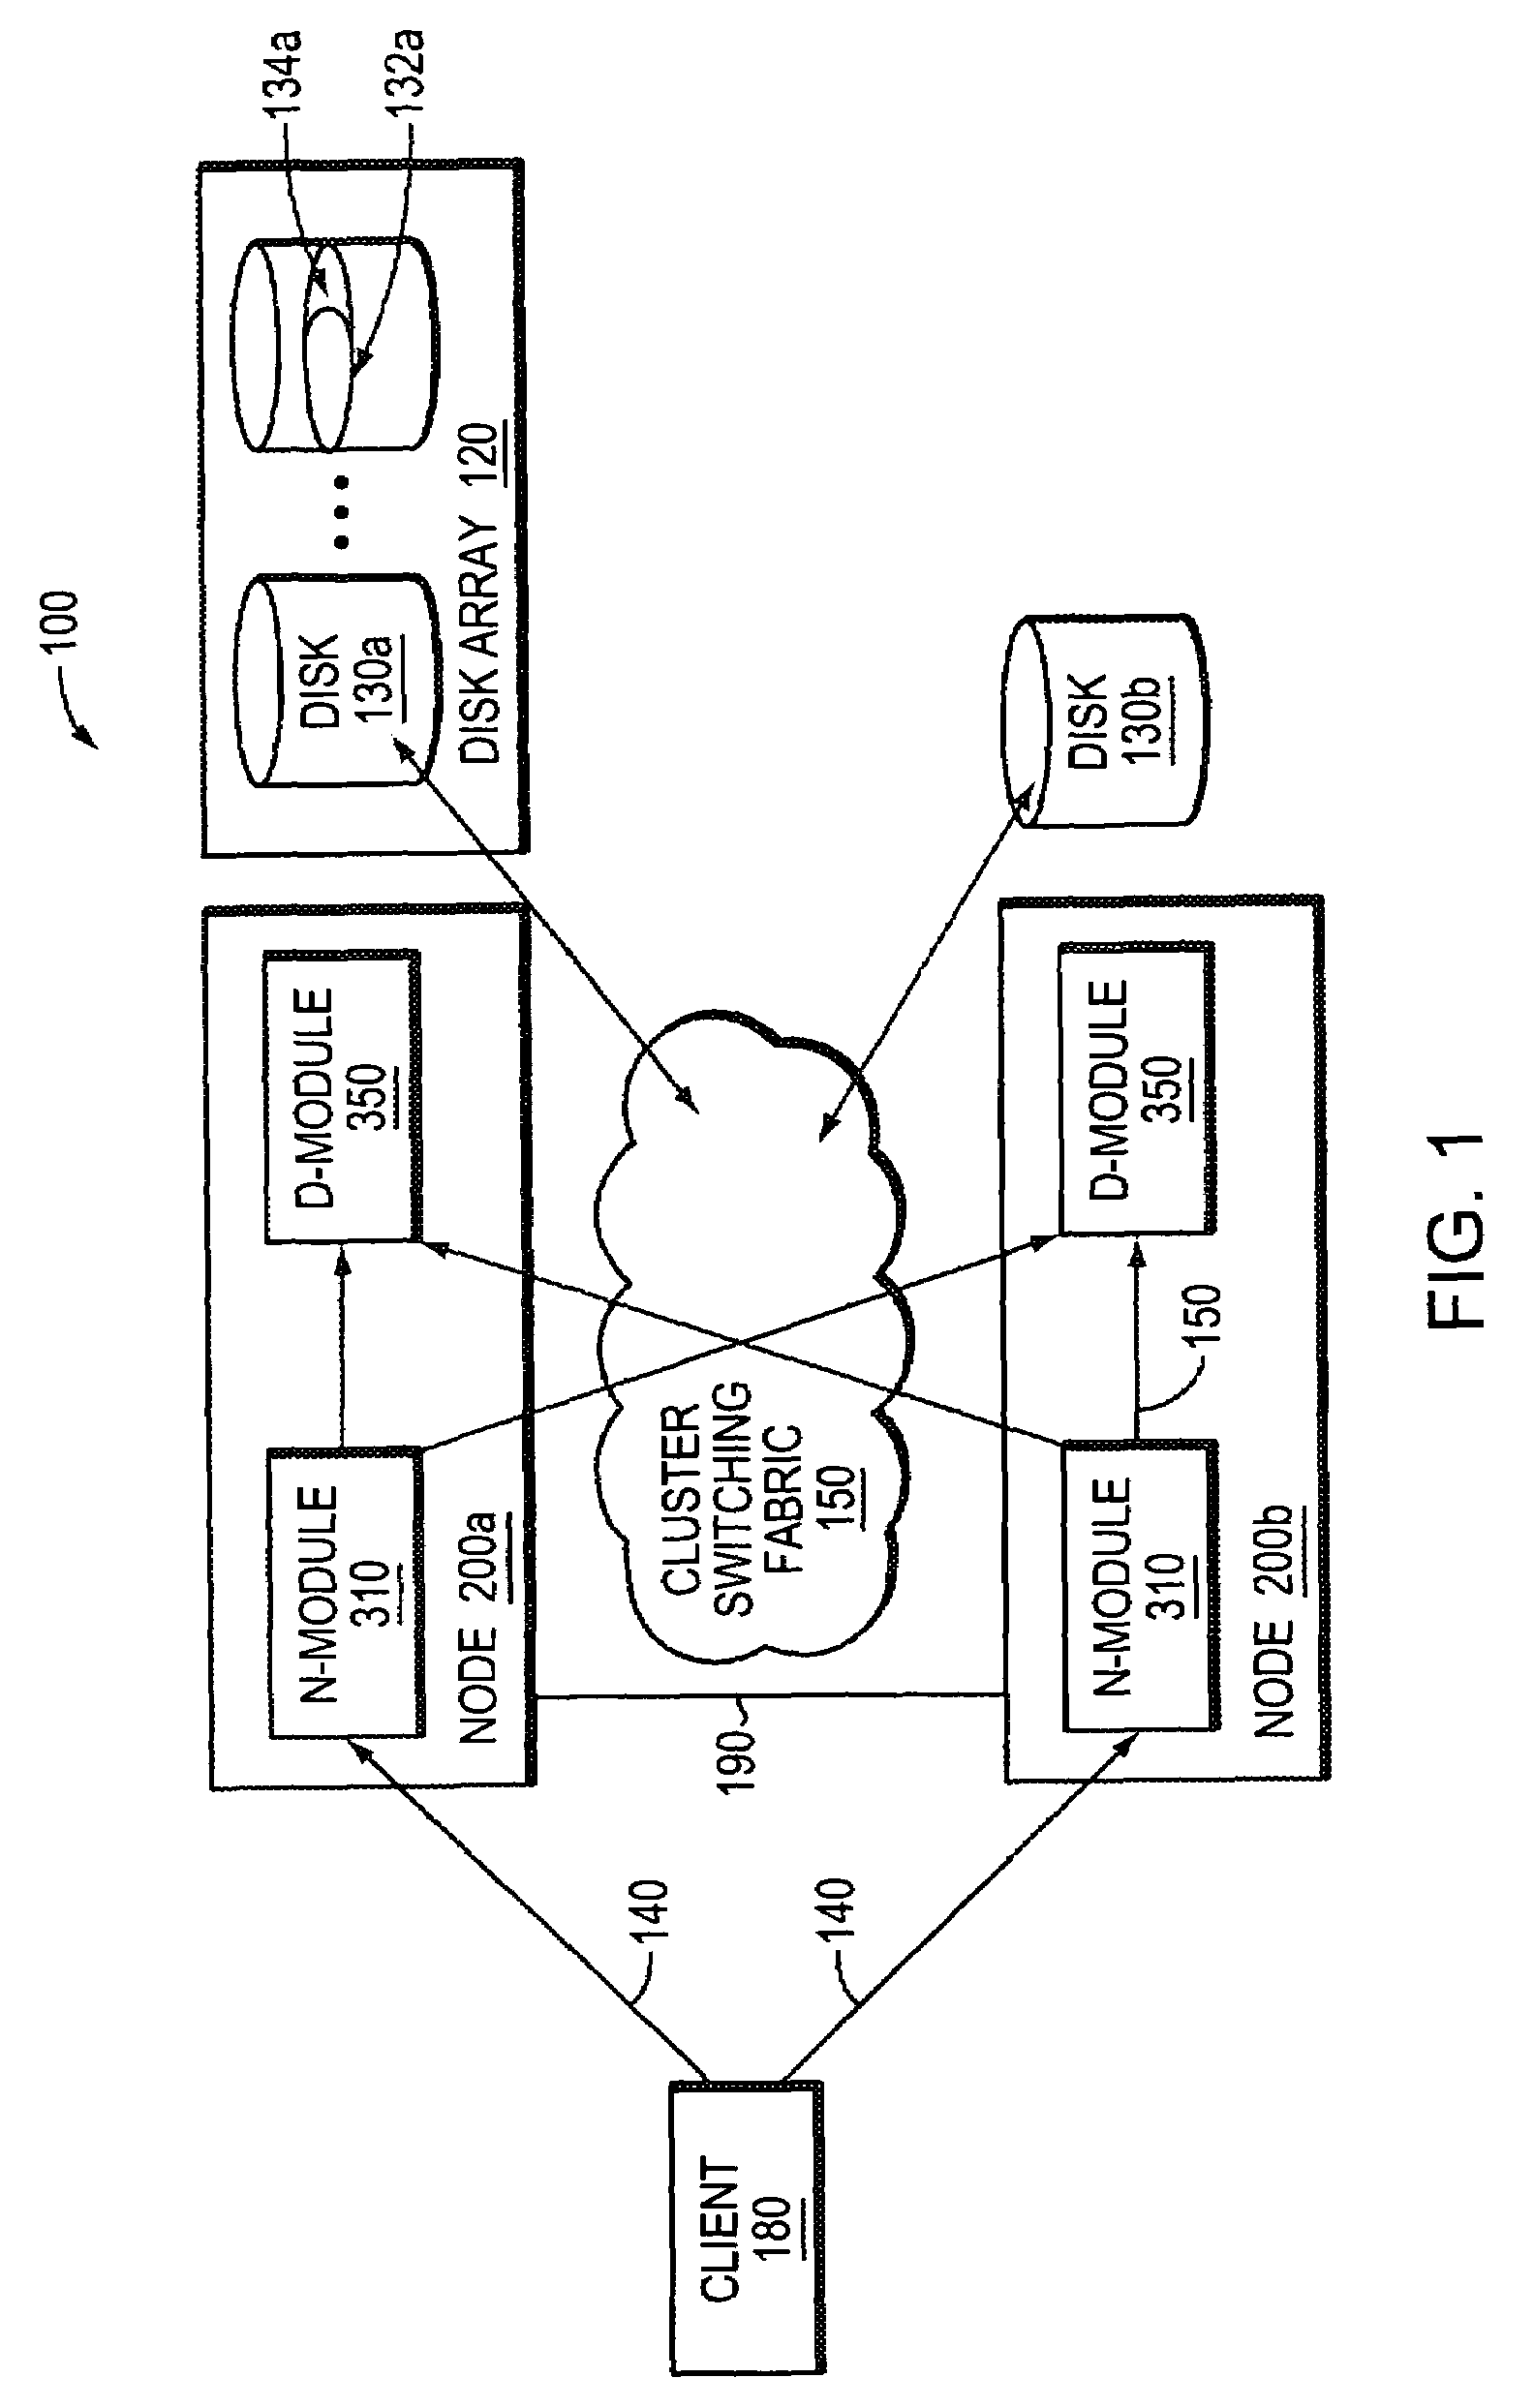 System and method for storage takeover